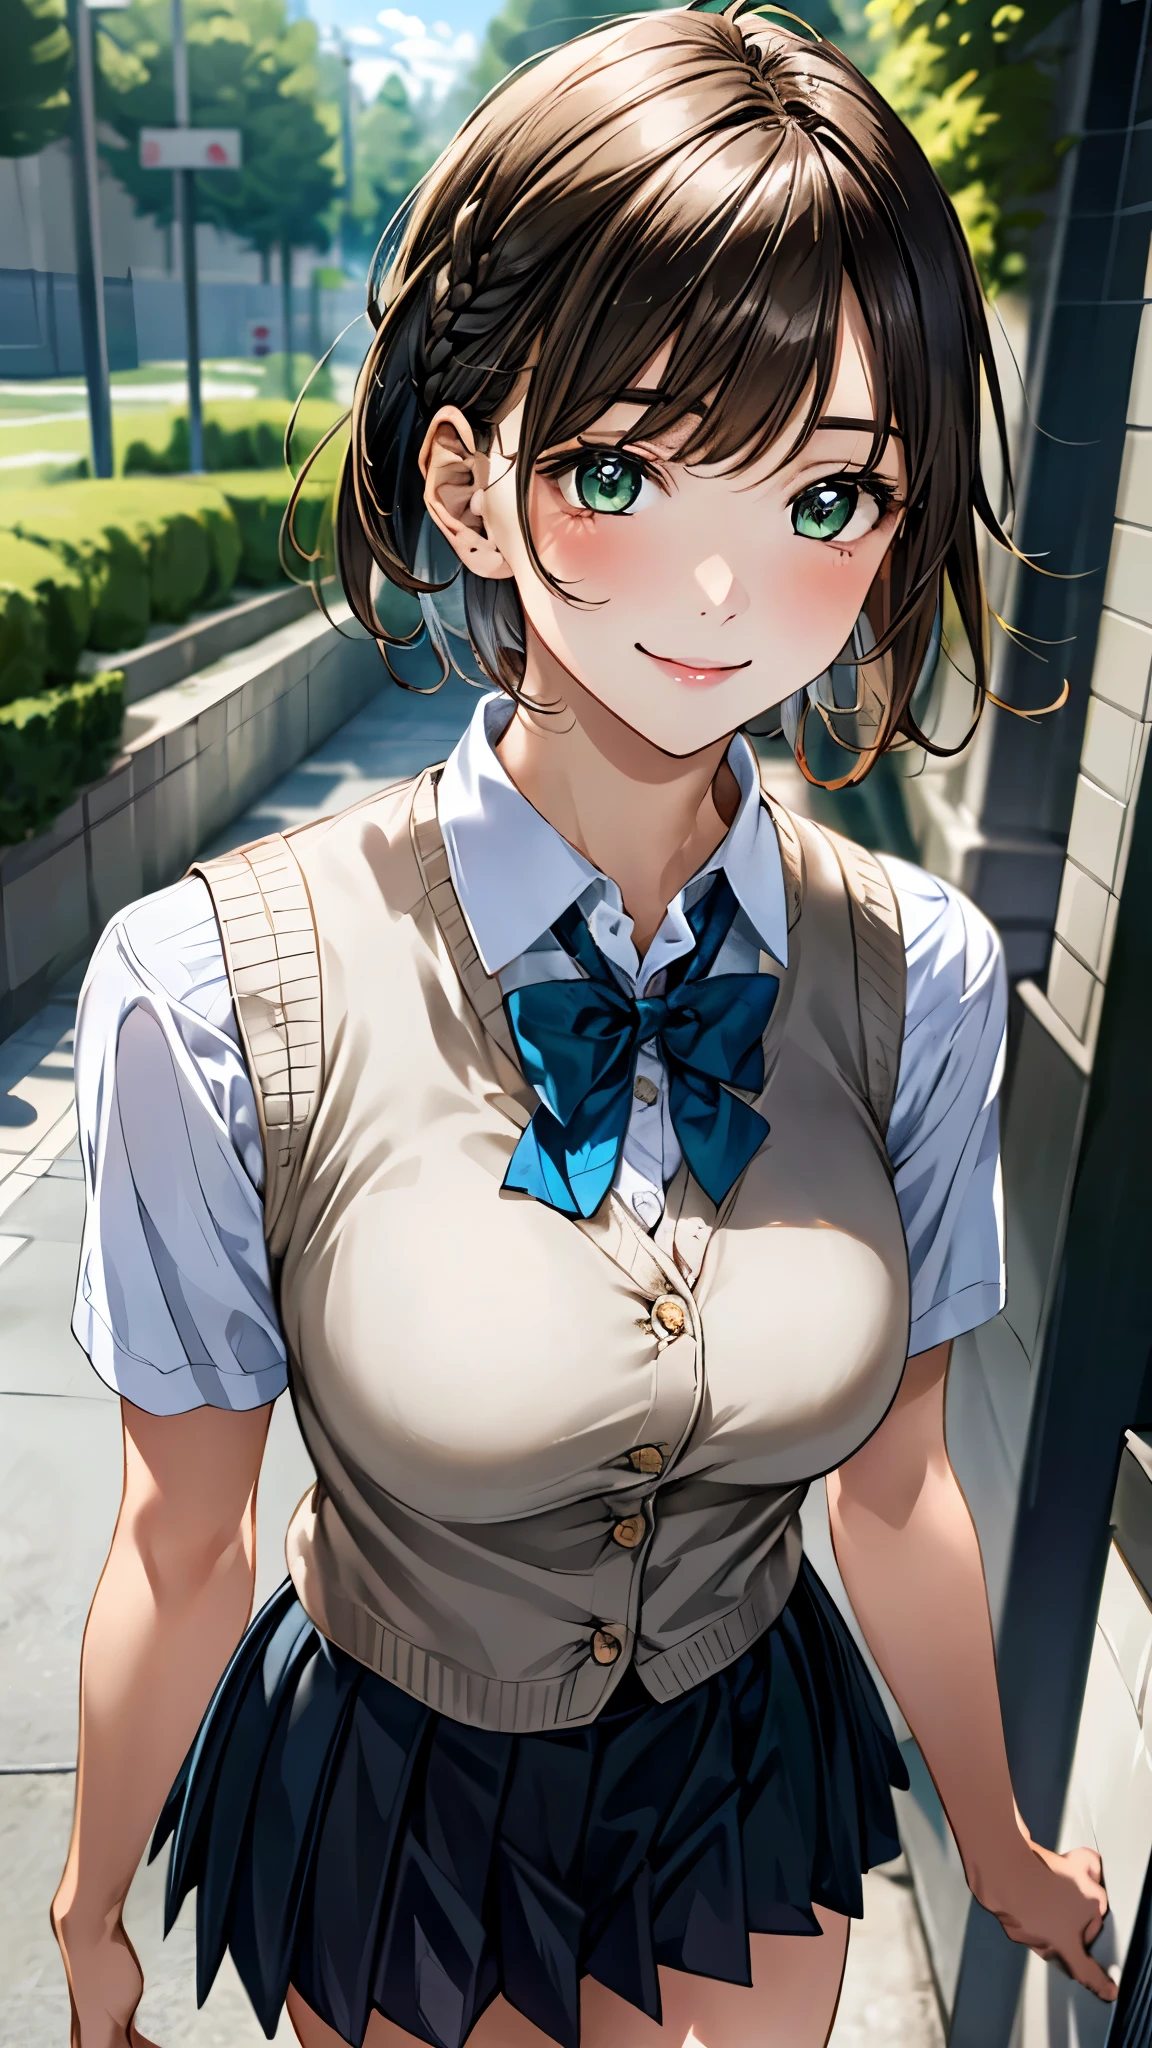 (masterpiece:1.2, top-quality), (realistic, photorealistic:1.4), beautiful illustration, (natural side lighting, movie lighting), 
looking at viewer, upper body, 1 girl, japanese, high school girl, 12 years old, perfect face, cute and symmetrical face, shiny skin, 
(short hair, braid, light brown hair), bangs, emerald greeneyes, big eyes, long eye lasher, (medium breasts), 
beautiful hair, beautiful face, beautiful detailed eyes, beautiful clavicle, beautiful body, beautiful chest, beautiful thigh, beautiful legs, beautiful fingers, 
((white collared shirts, light blue bow tie, dark grey pleated mini skirt, yellow grown knitted vest)), 
(beautiful scenery), evening, (school hallway), walking, ((breast grab)), (in heat, aroused, seductive smile),